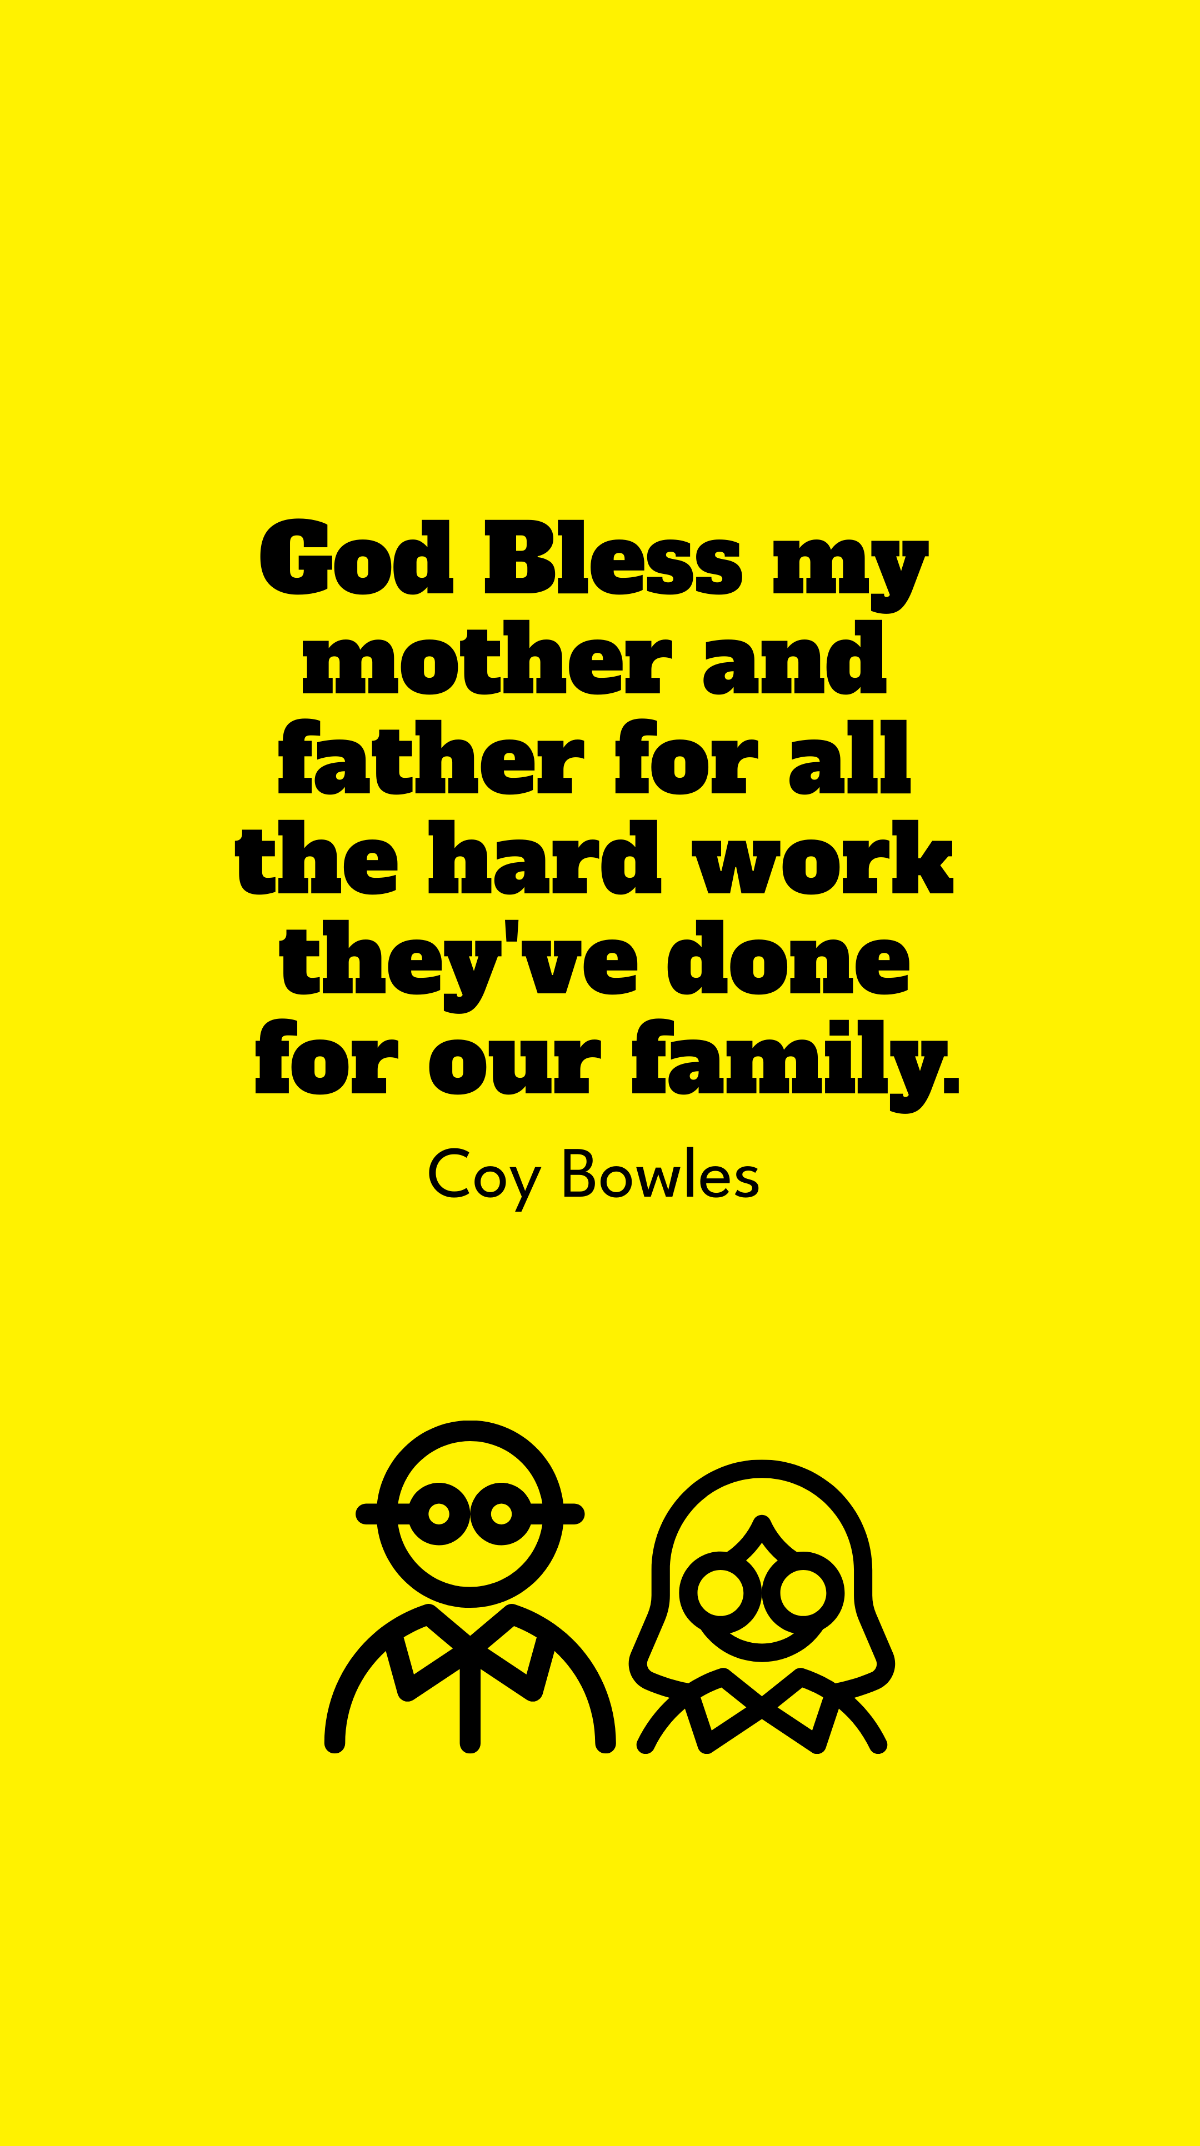 Coy Bowles - God Bless my mother and father for all the hard work they've done for our family. Template